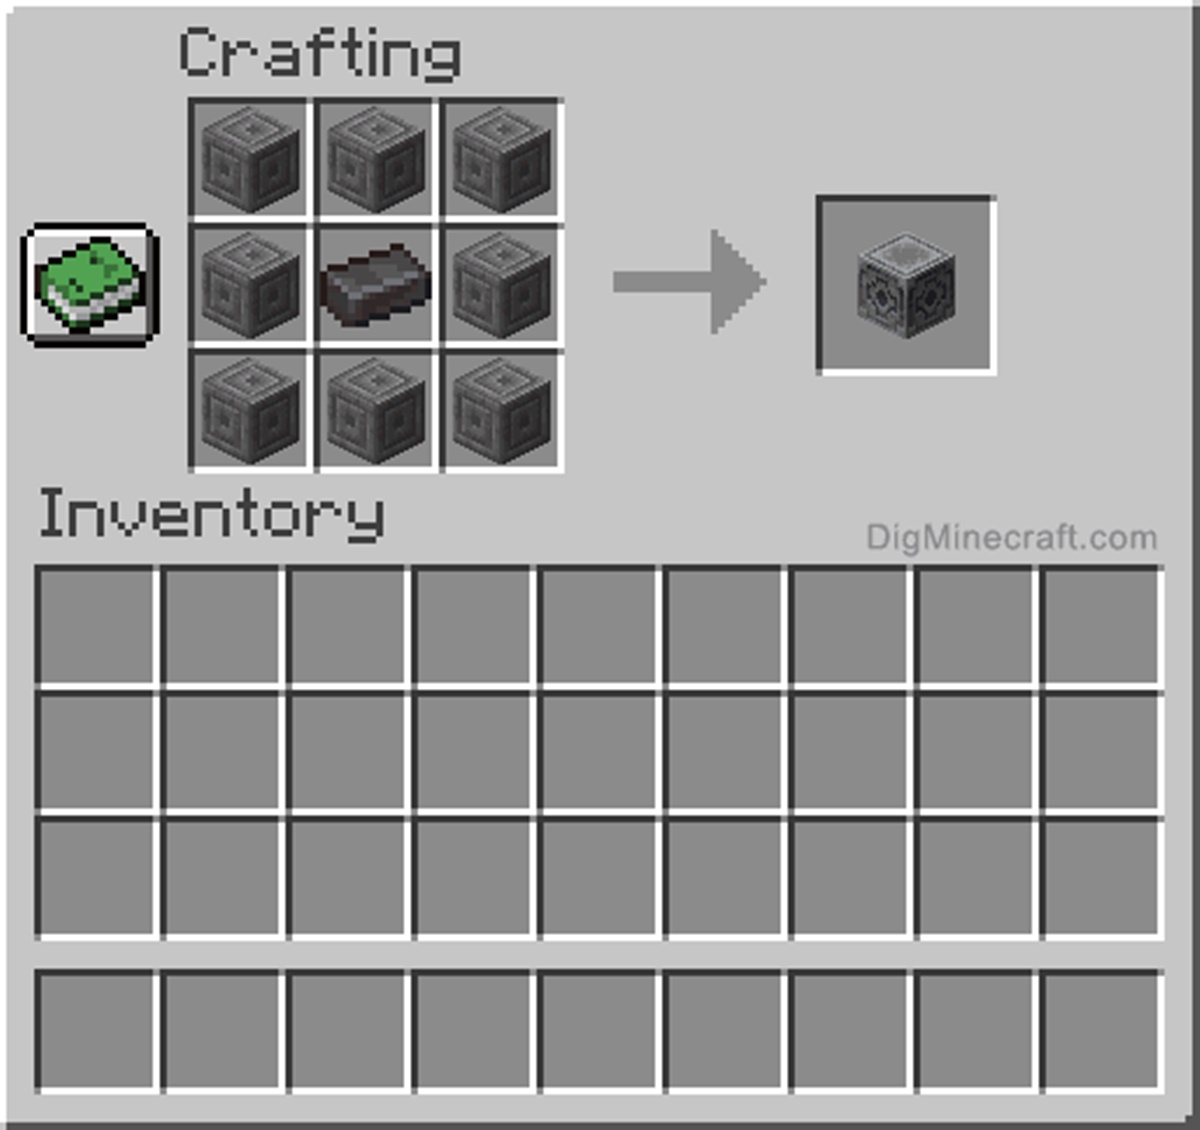 How To Make A Lodestone In Minecraft